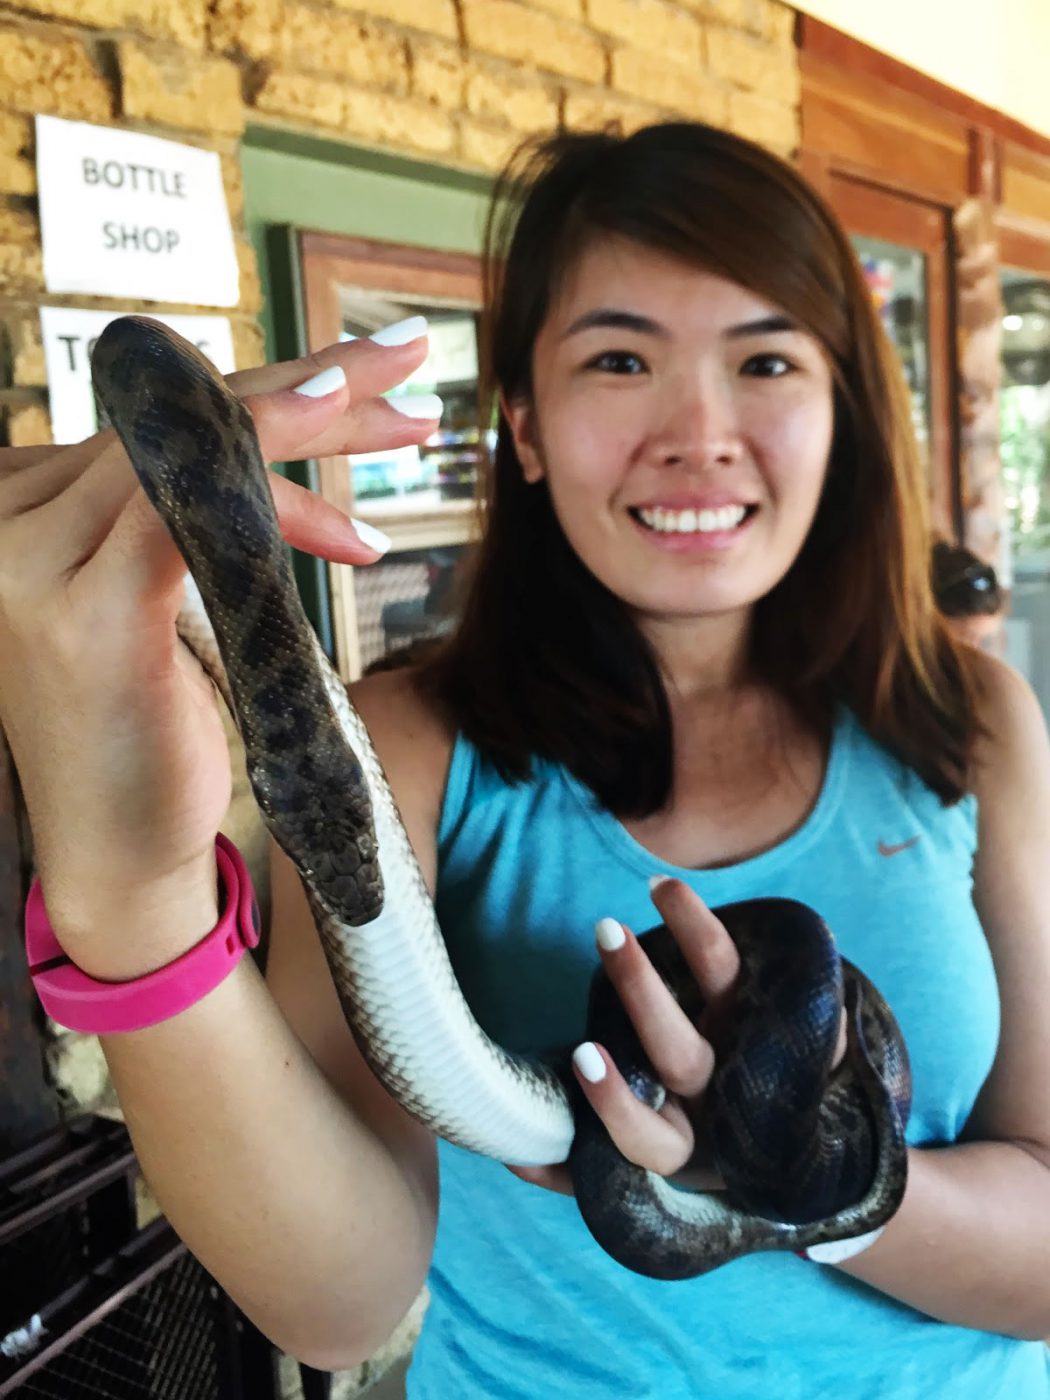 Holding a pet snake from a convenience store